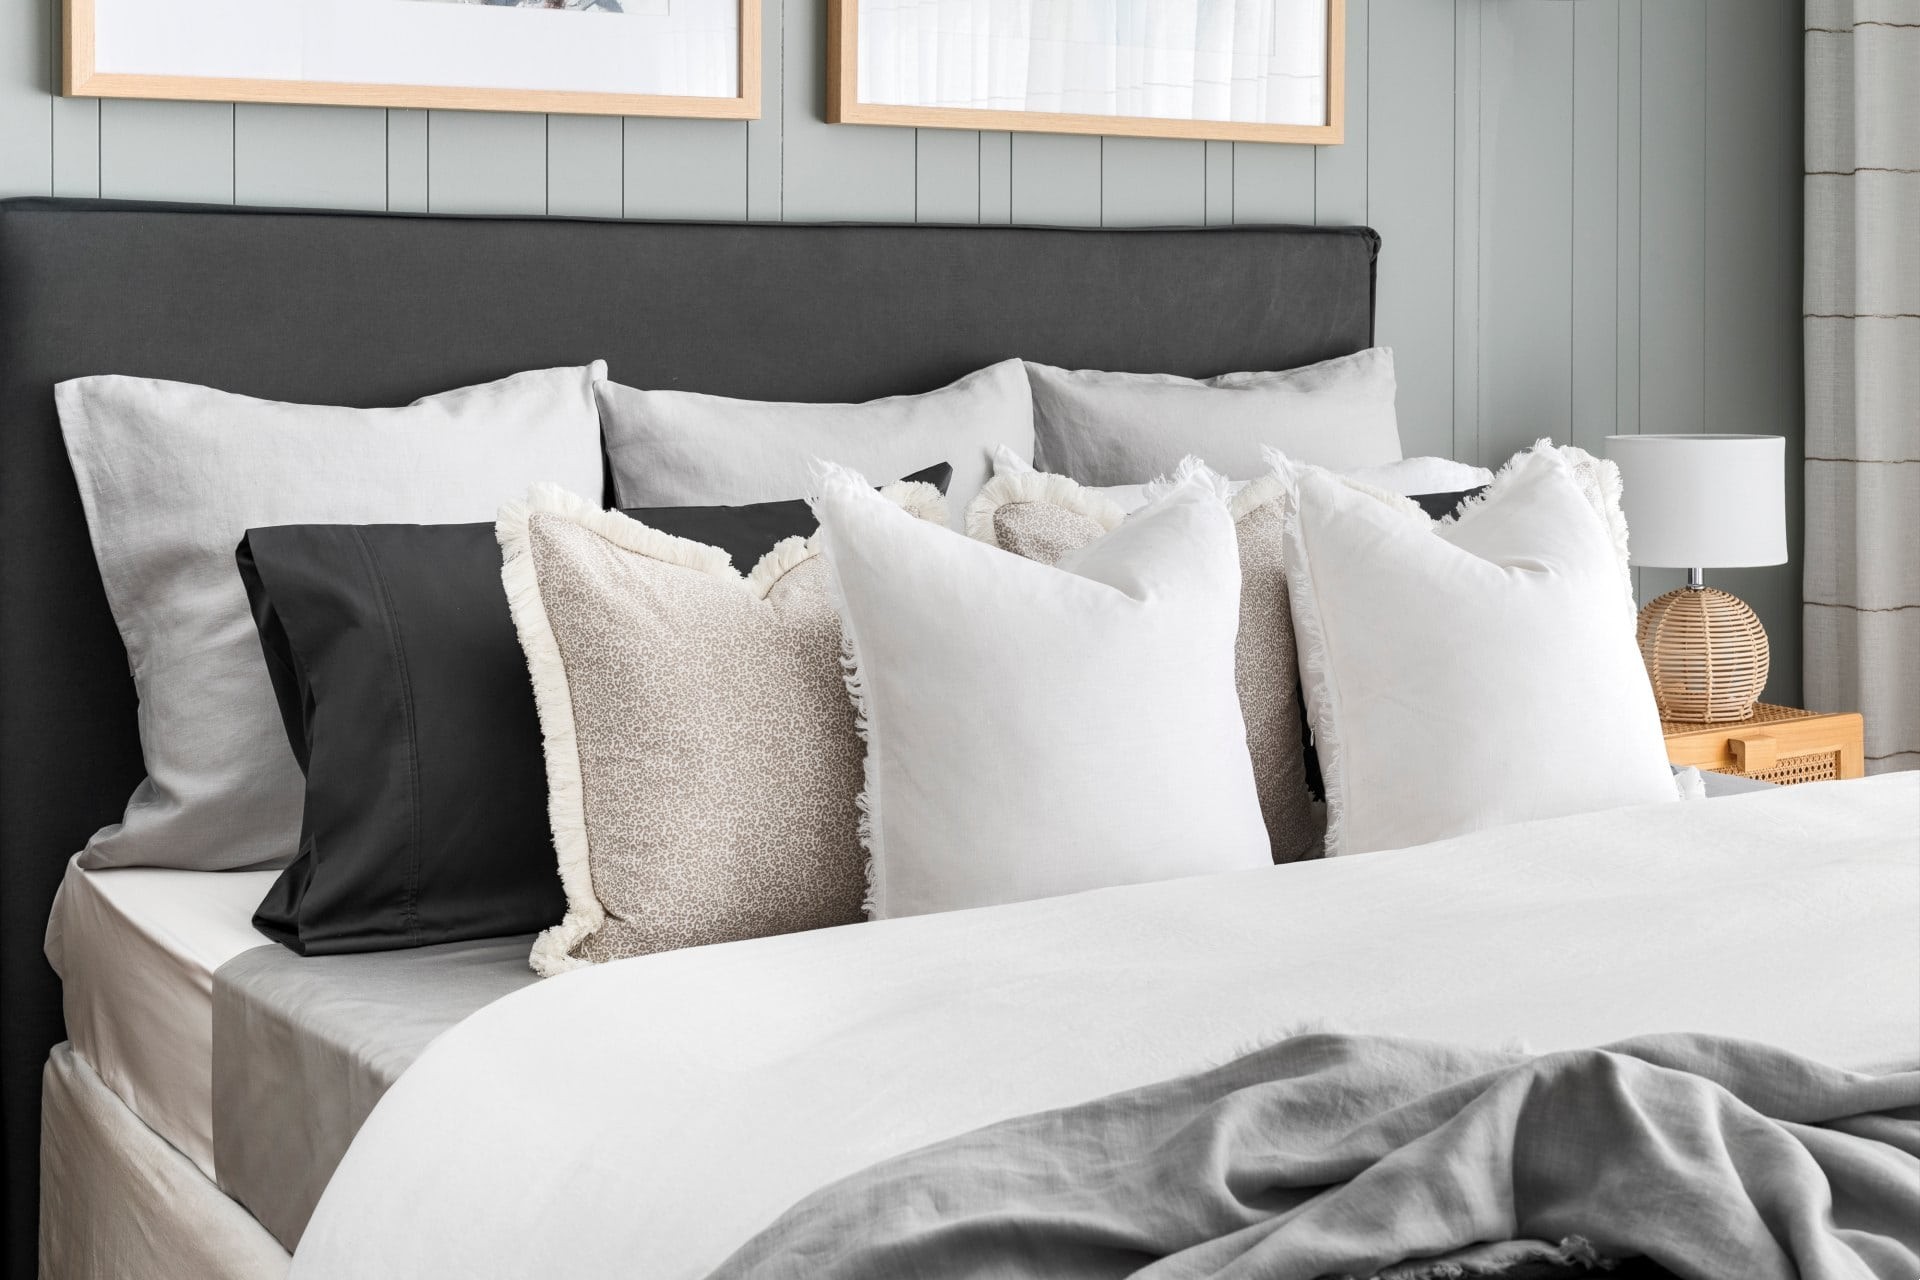 styling a bed with pillows and cushions white bedding grey headboard sage green vj panel wall